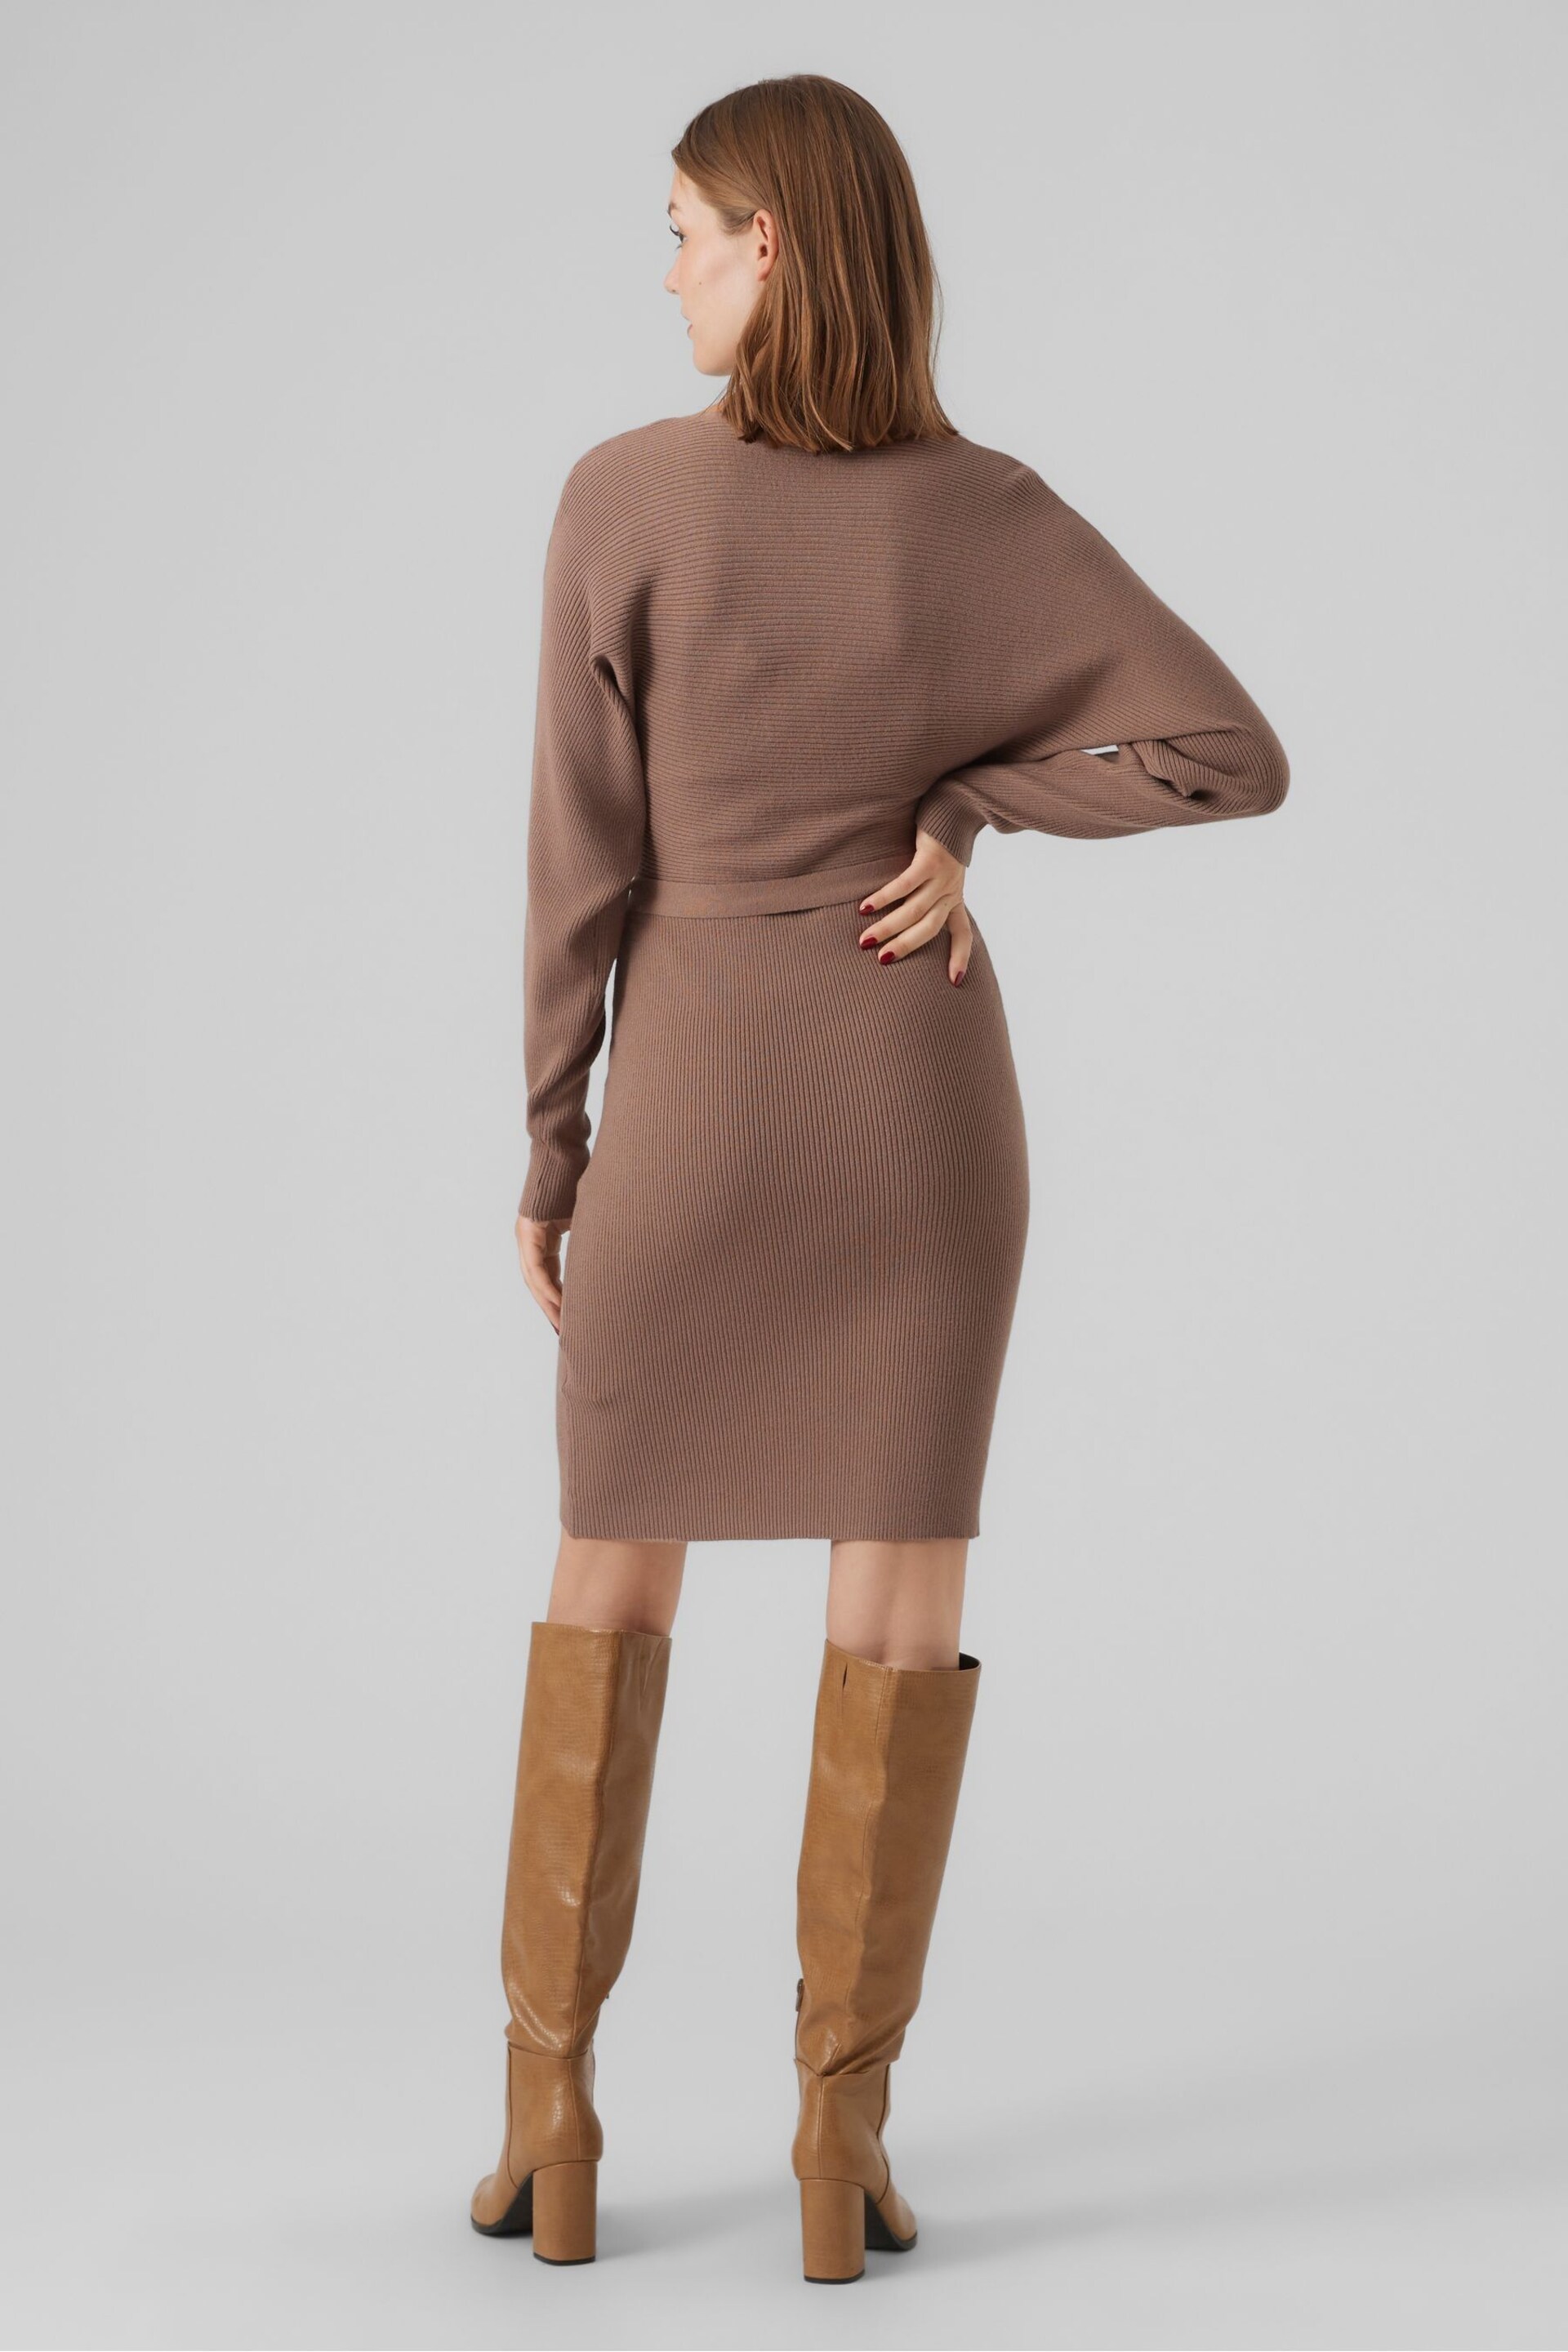 VERO MODA Brown V-Neck Wrap Belted Knitted Dress - Image 2 of 5